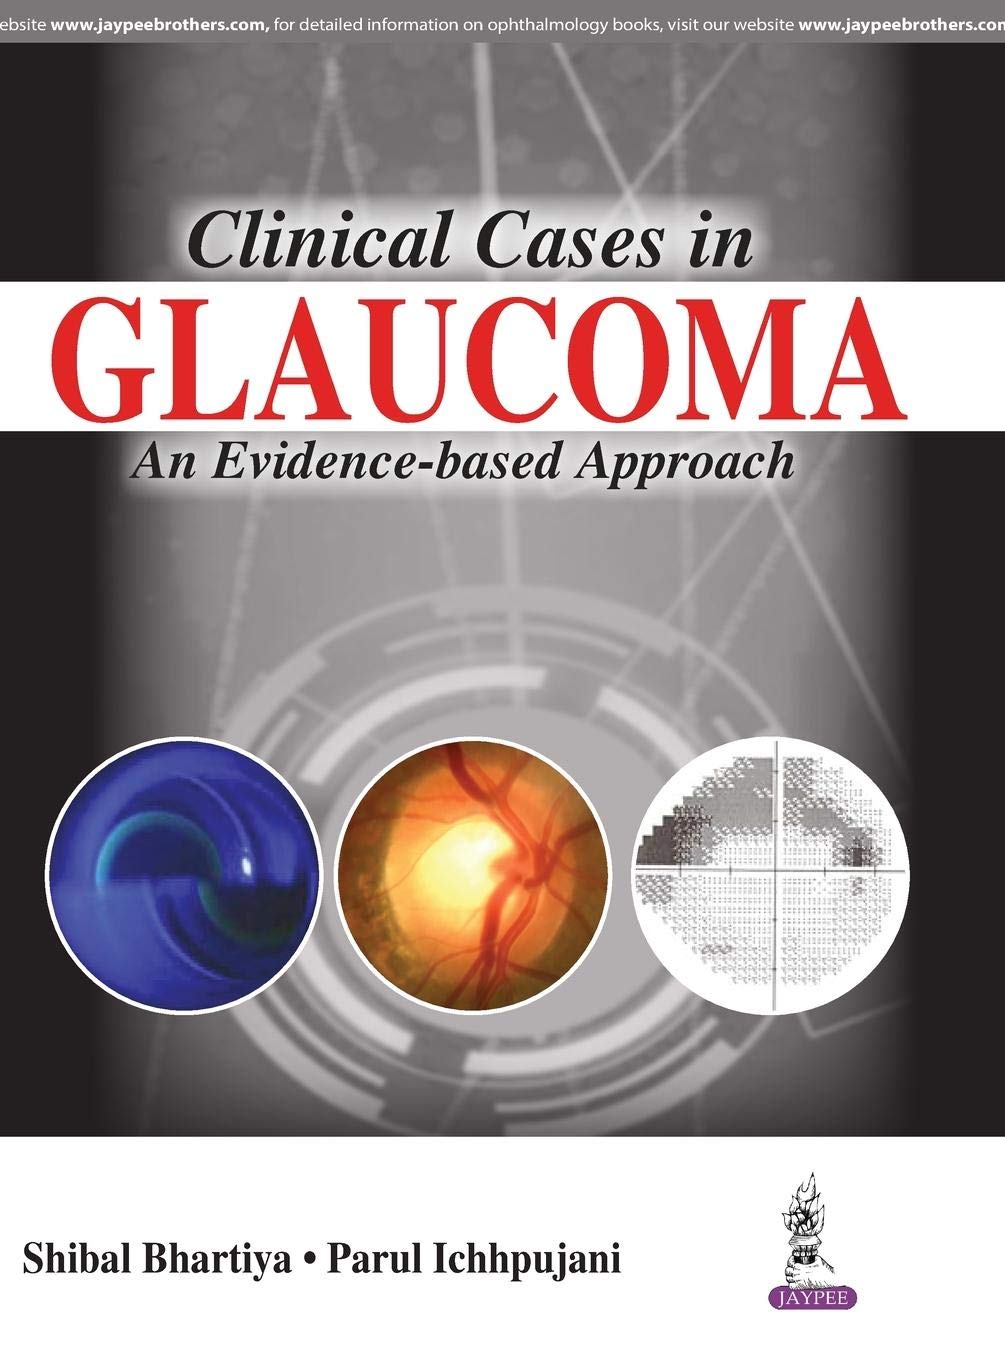 Clinical Cases In Glaucoma An Evidence-Based Approach